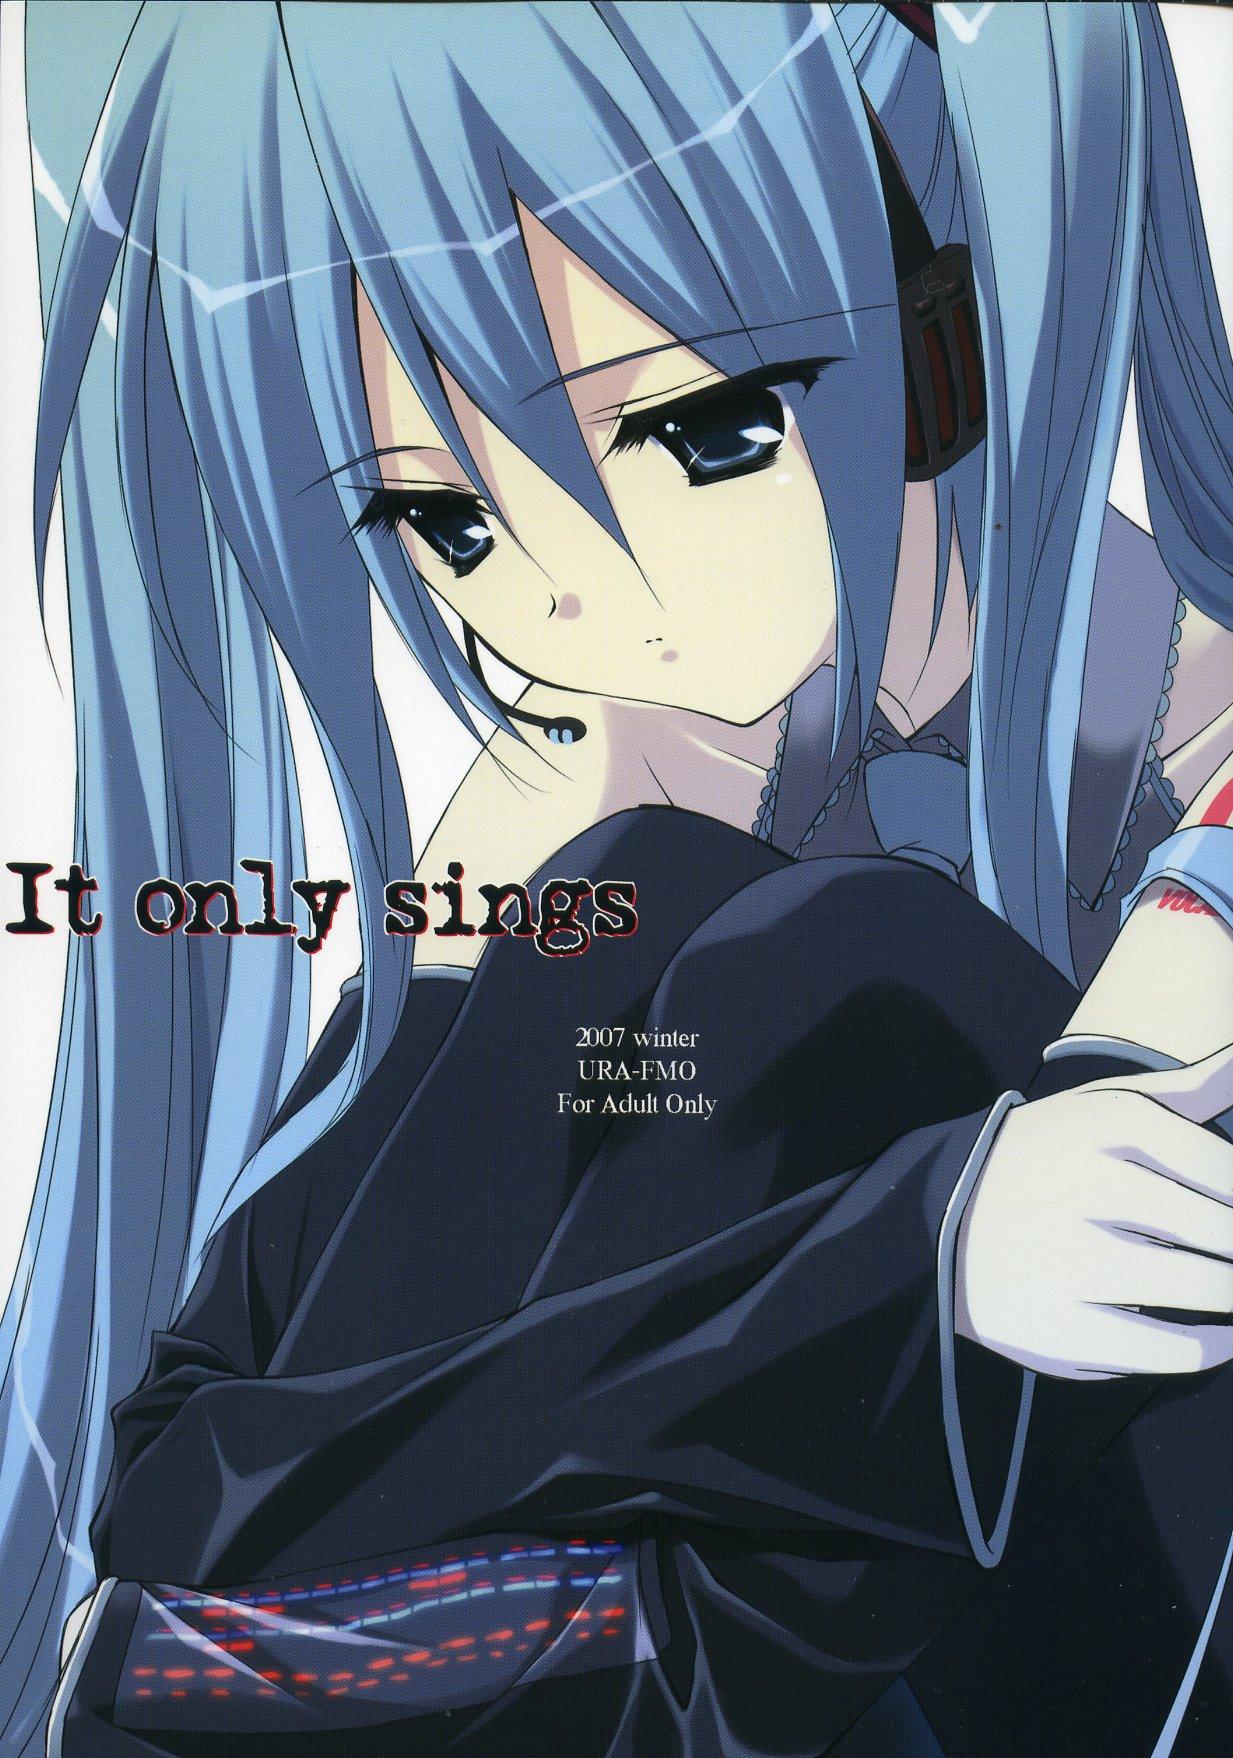 Coeds It only sings - Vocaloid Sex - Picture 1